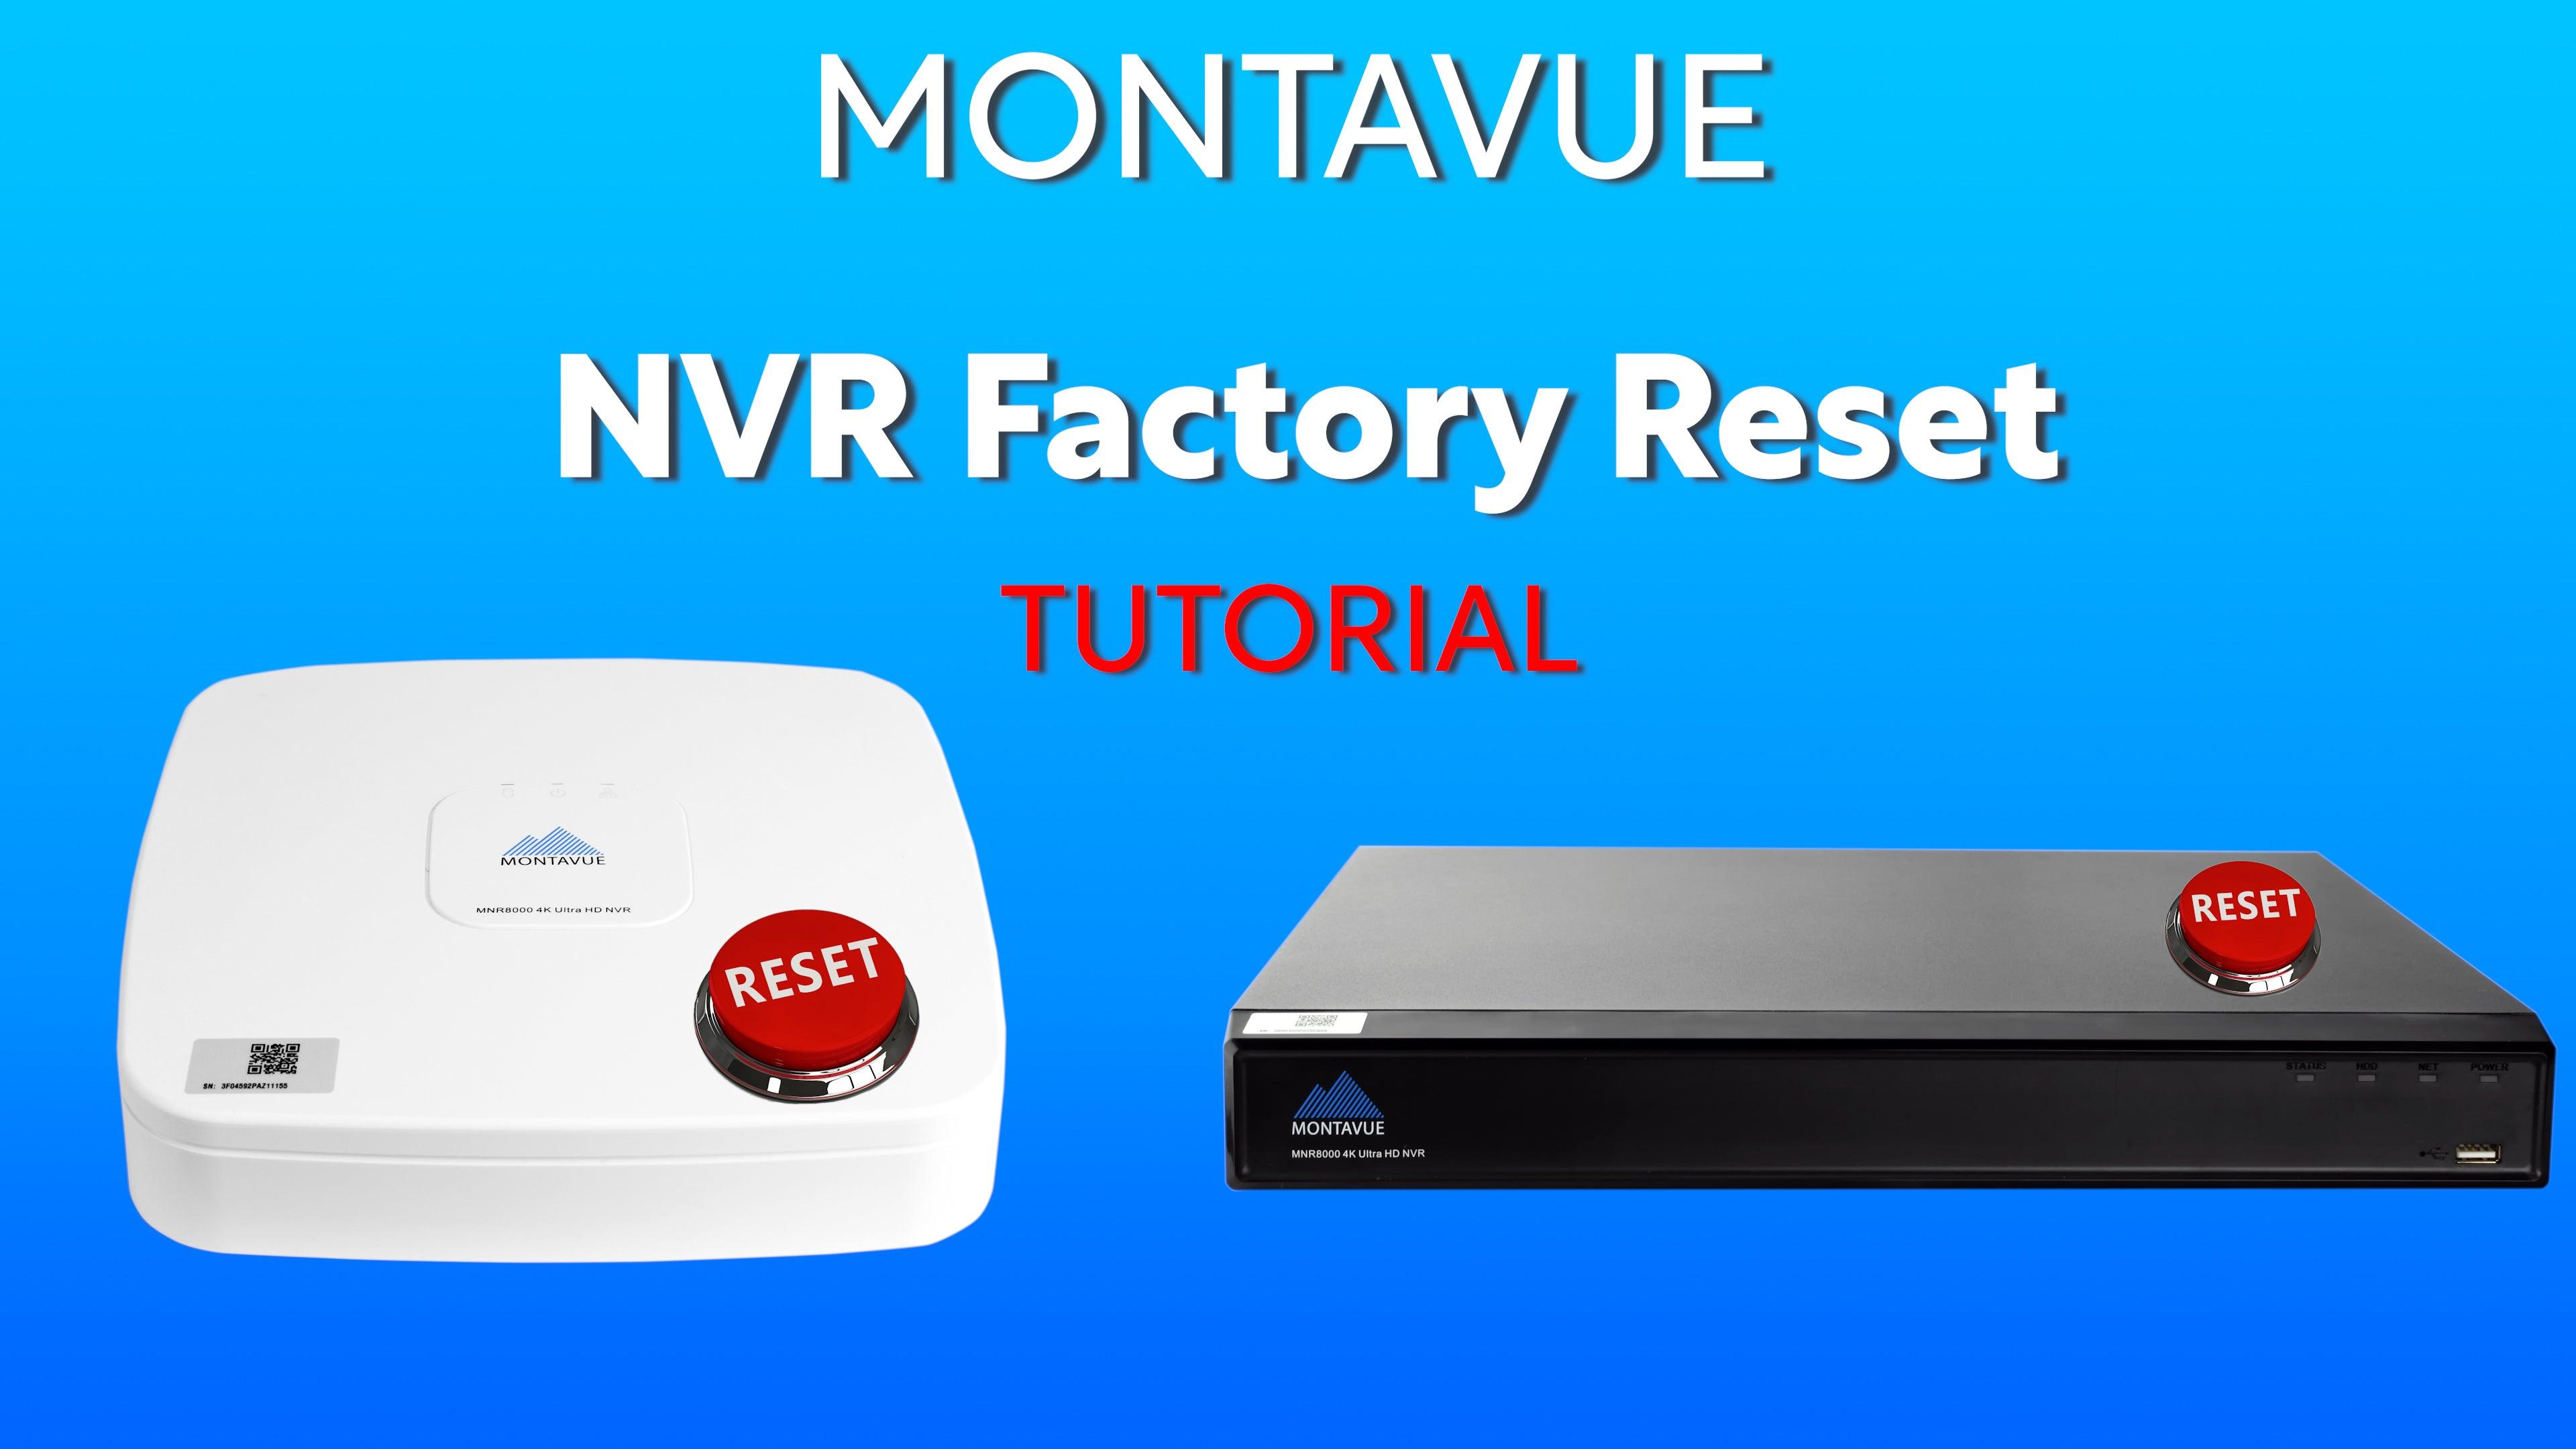 NVR Factory Reset Instructions - Montavue